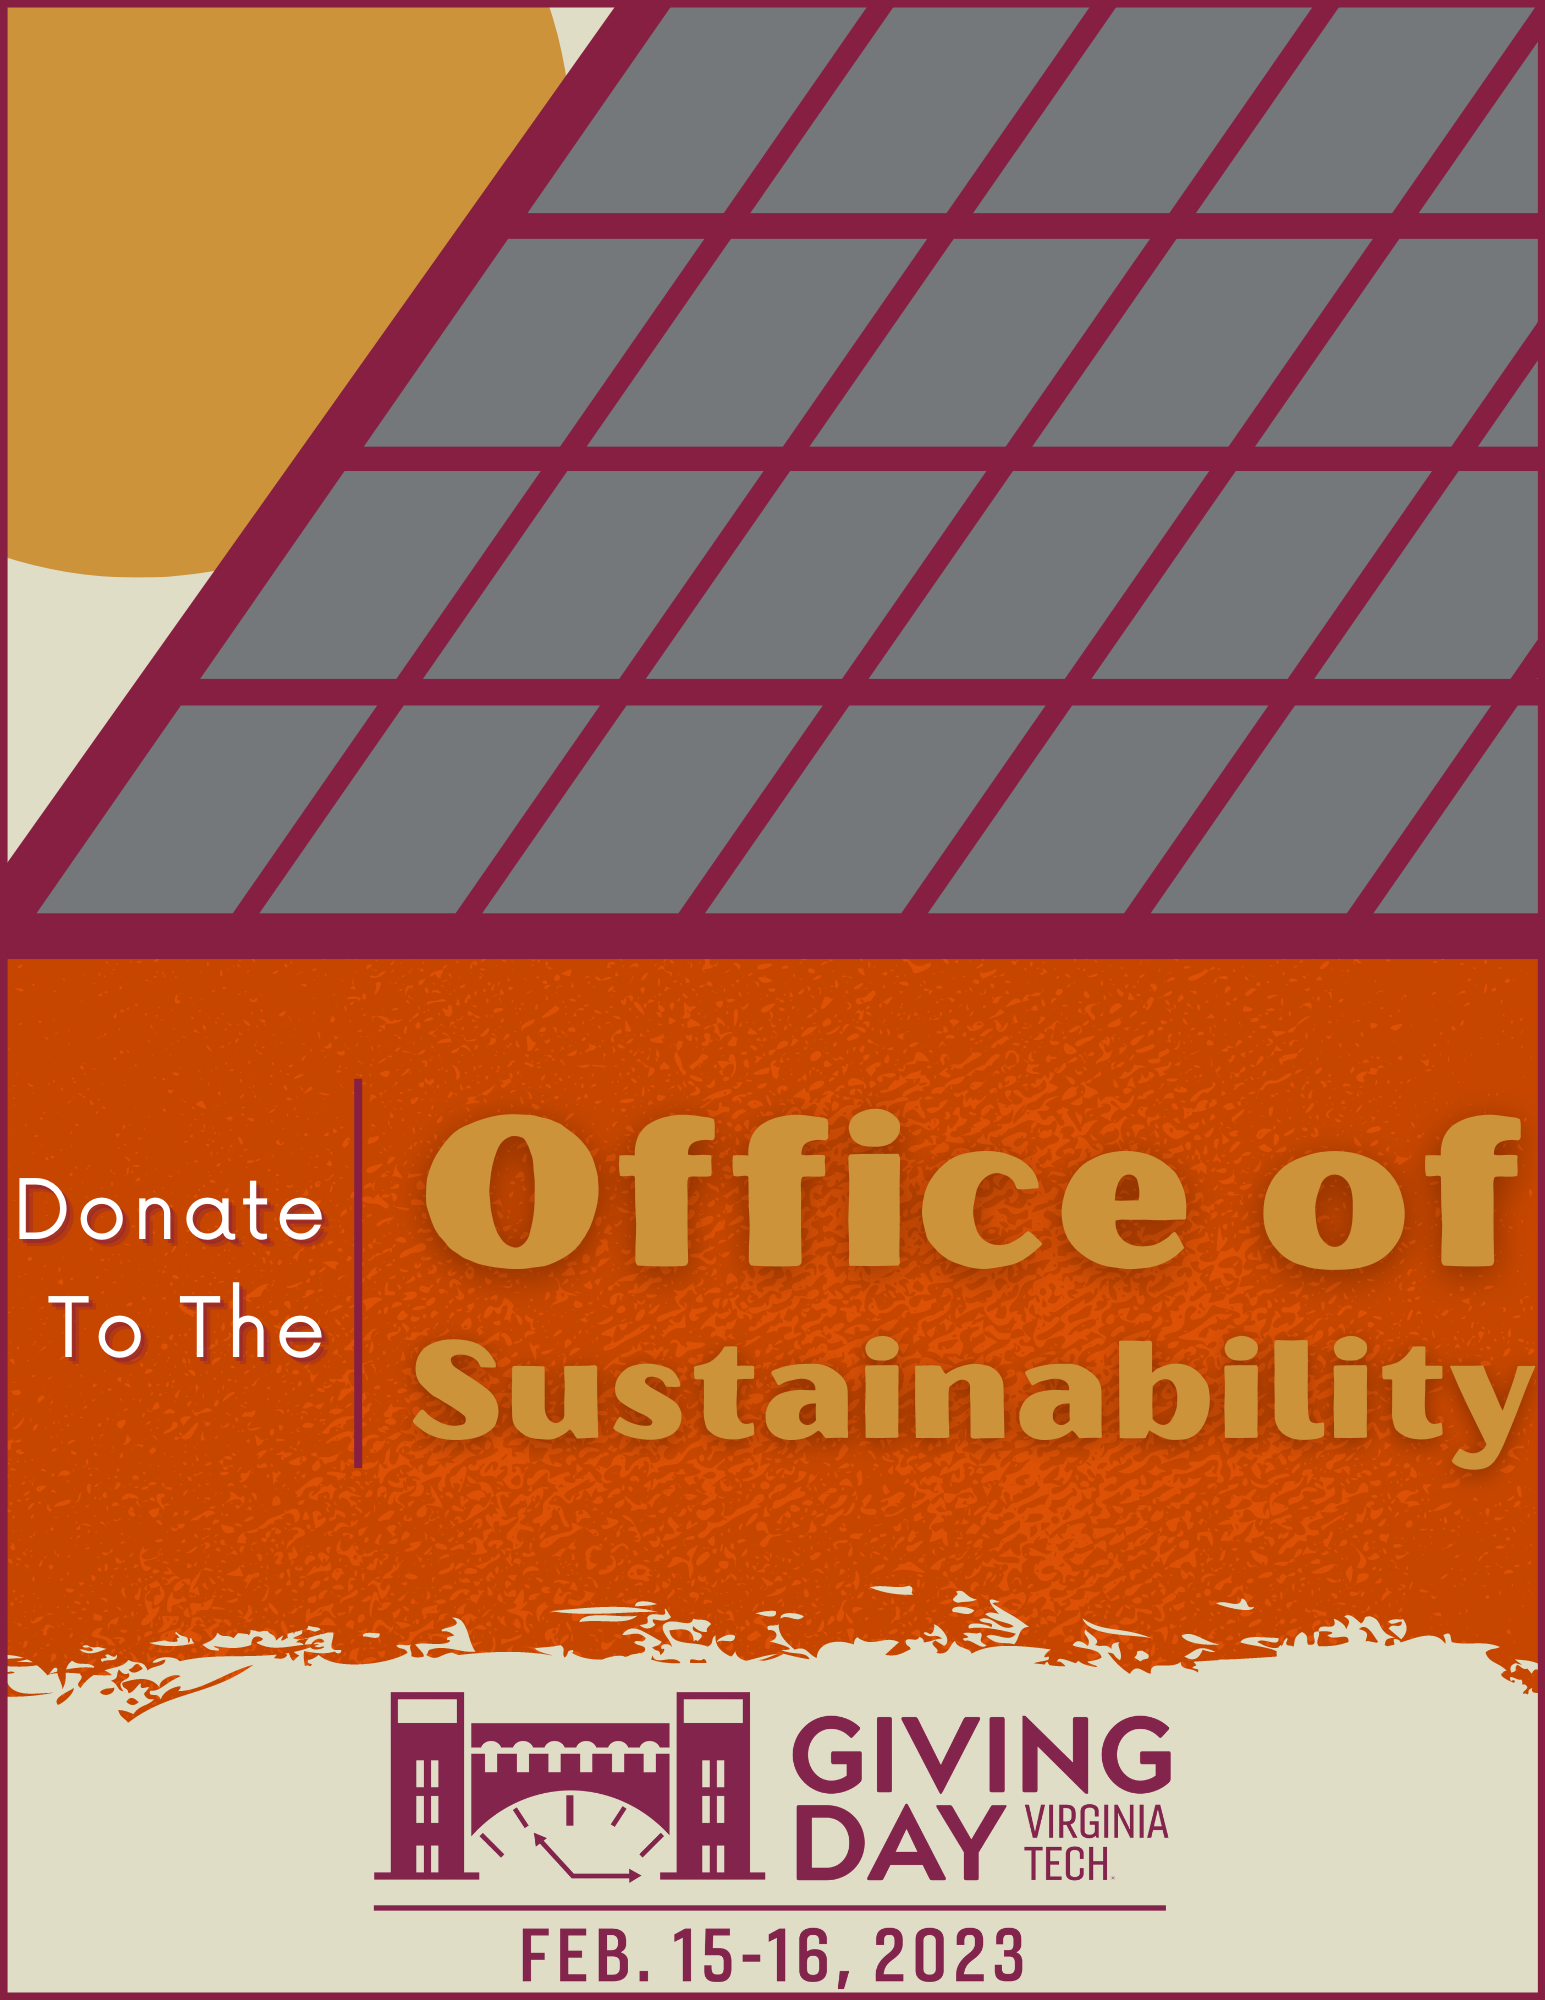 Image says Donate to the Office of Sustainability with solar panel image on top